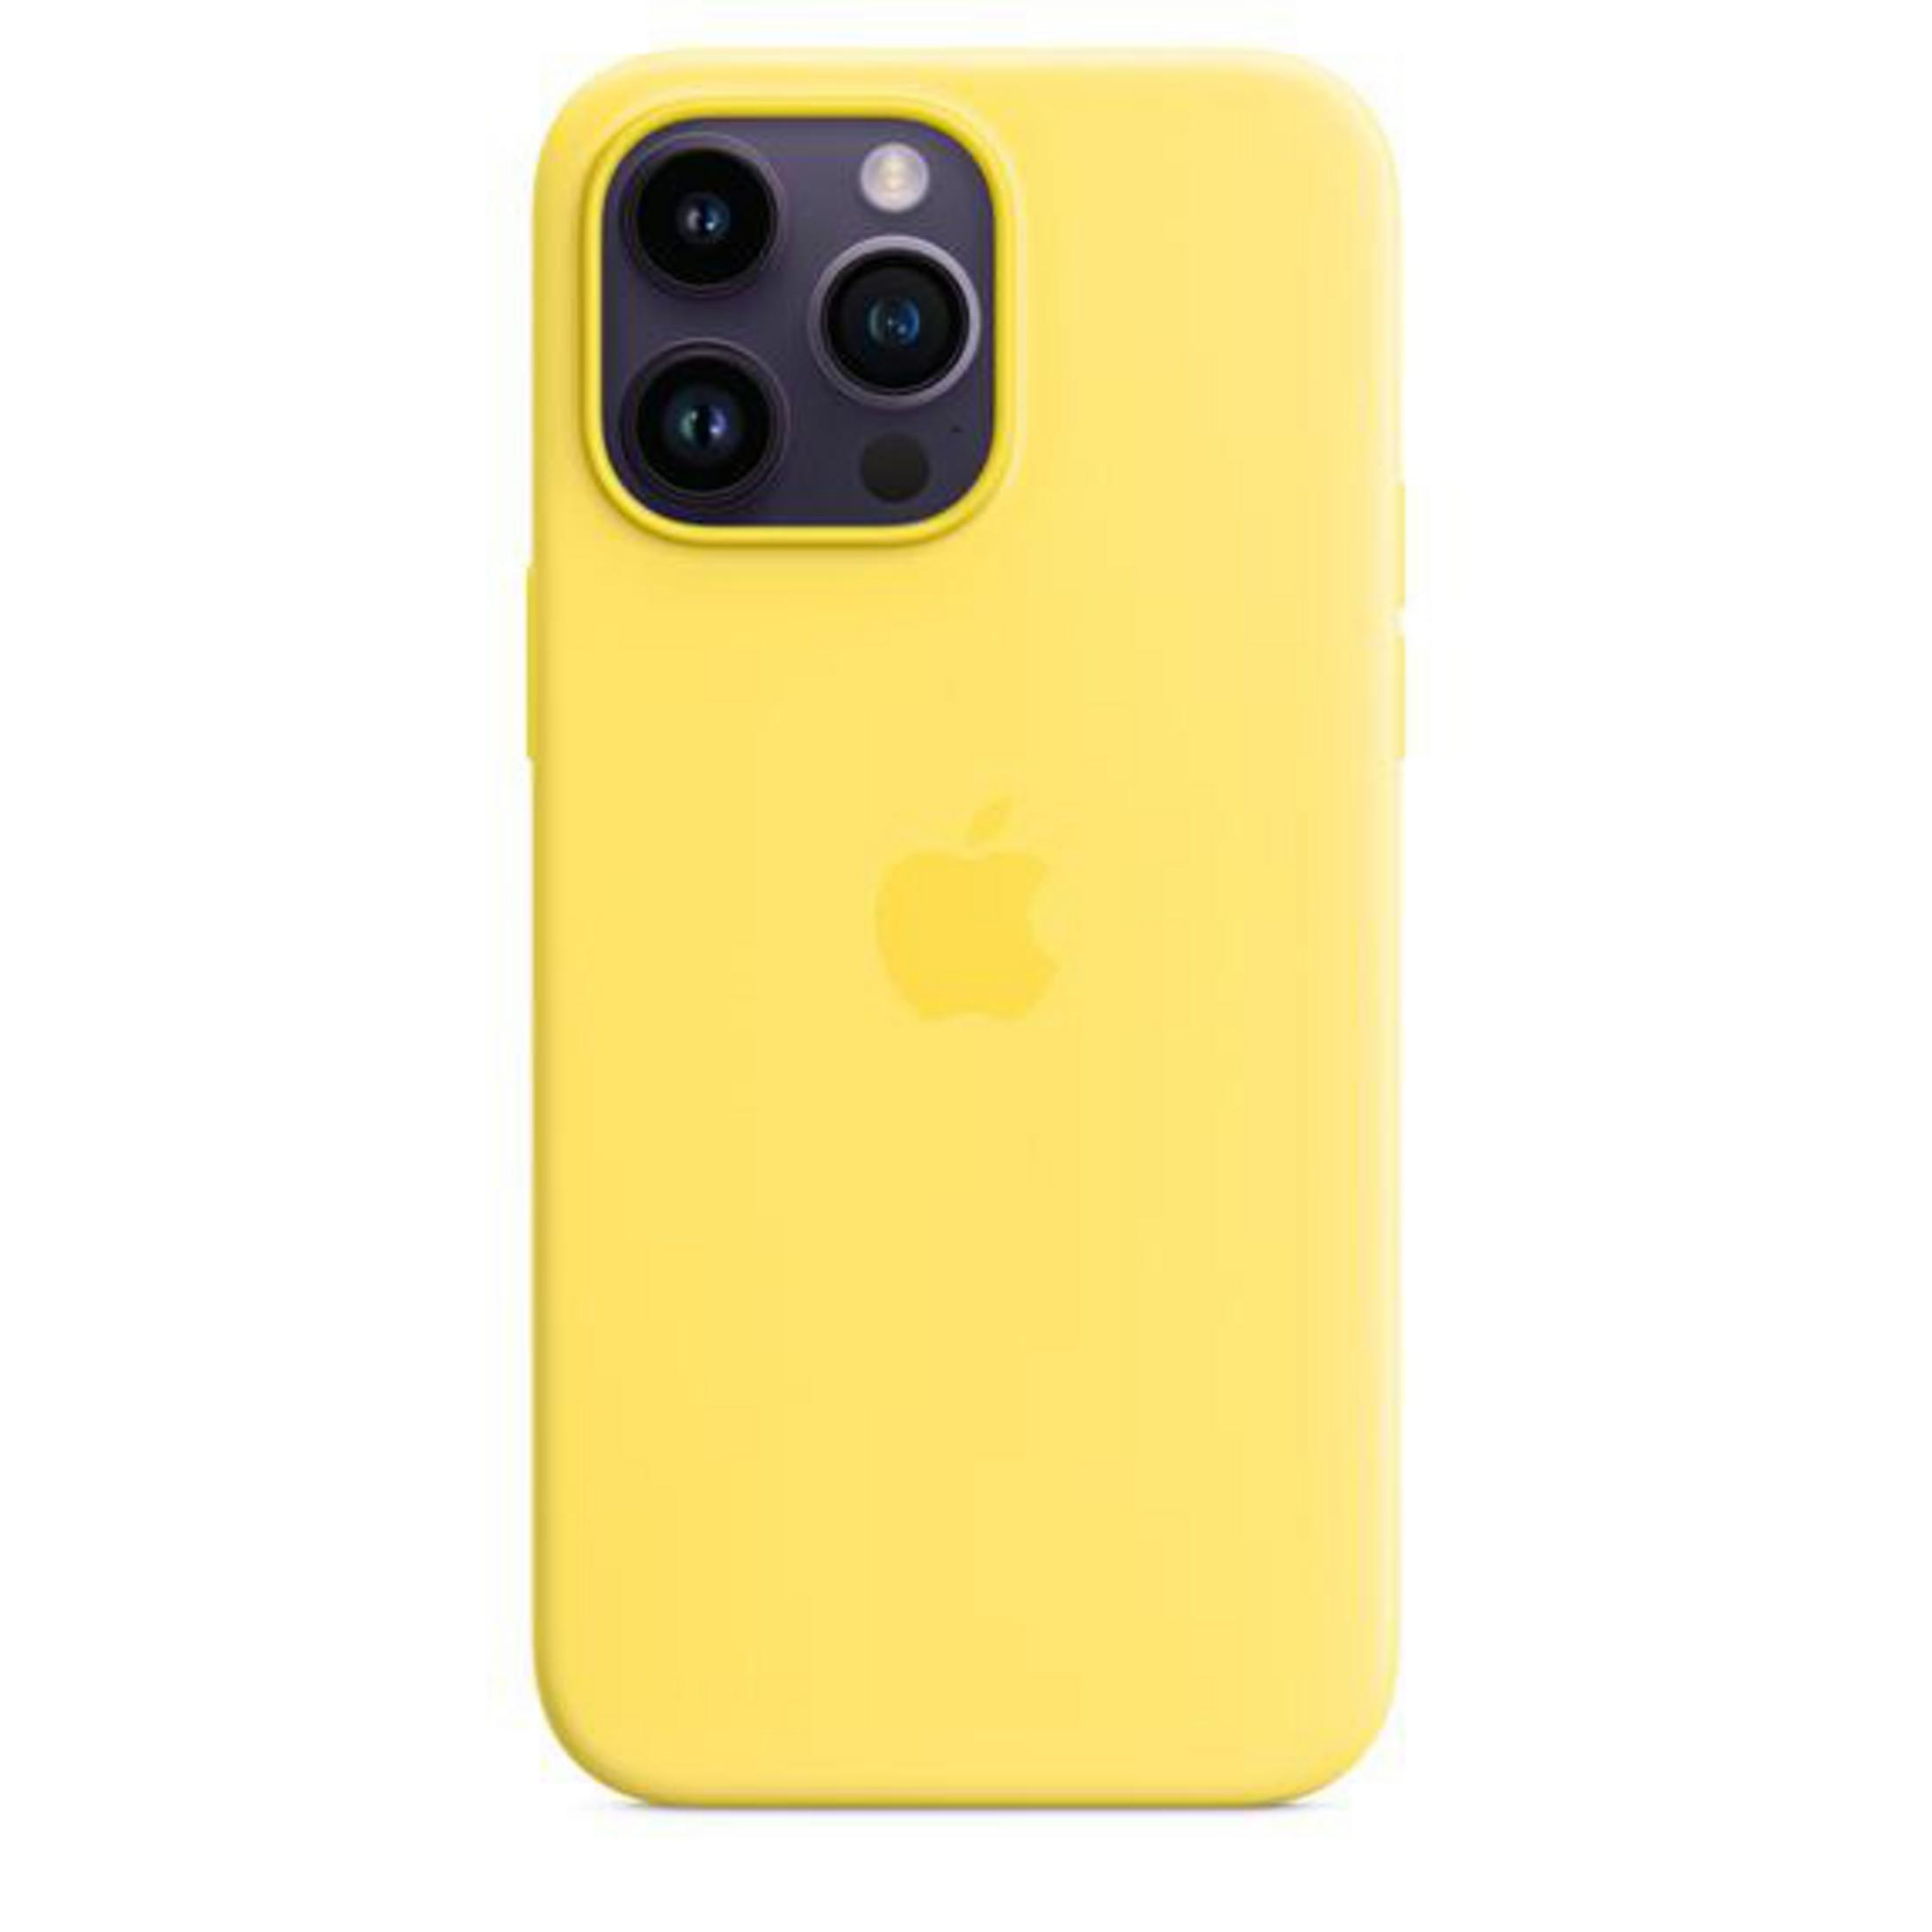 APPLE MQUL3ZM/A IP14PROMAX SIL Backcover, CAYLW, CASE iPhone Max, Pro MS Kanariengelb Apple, 14